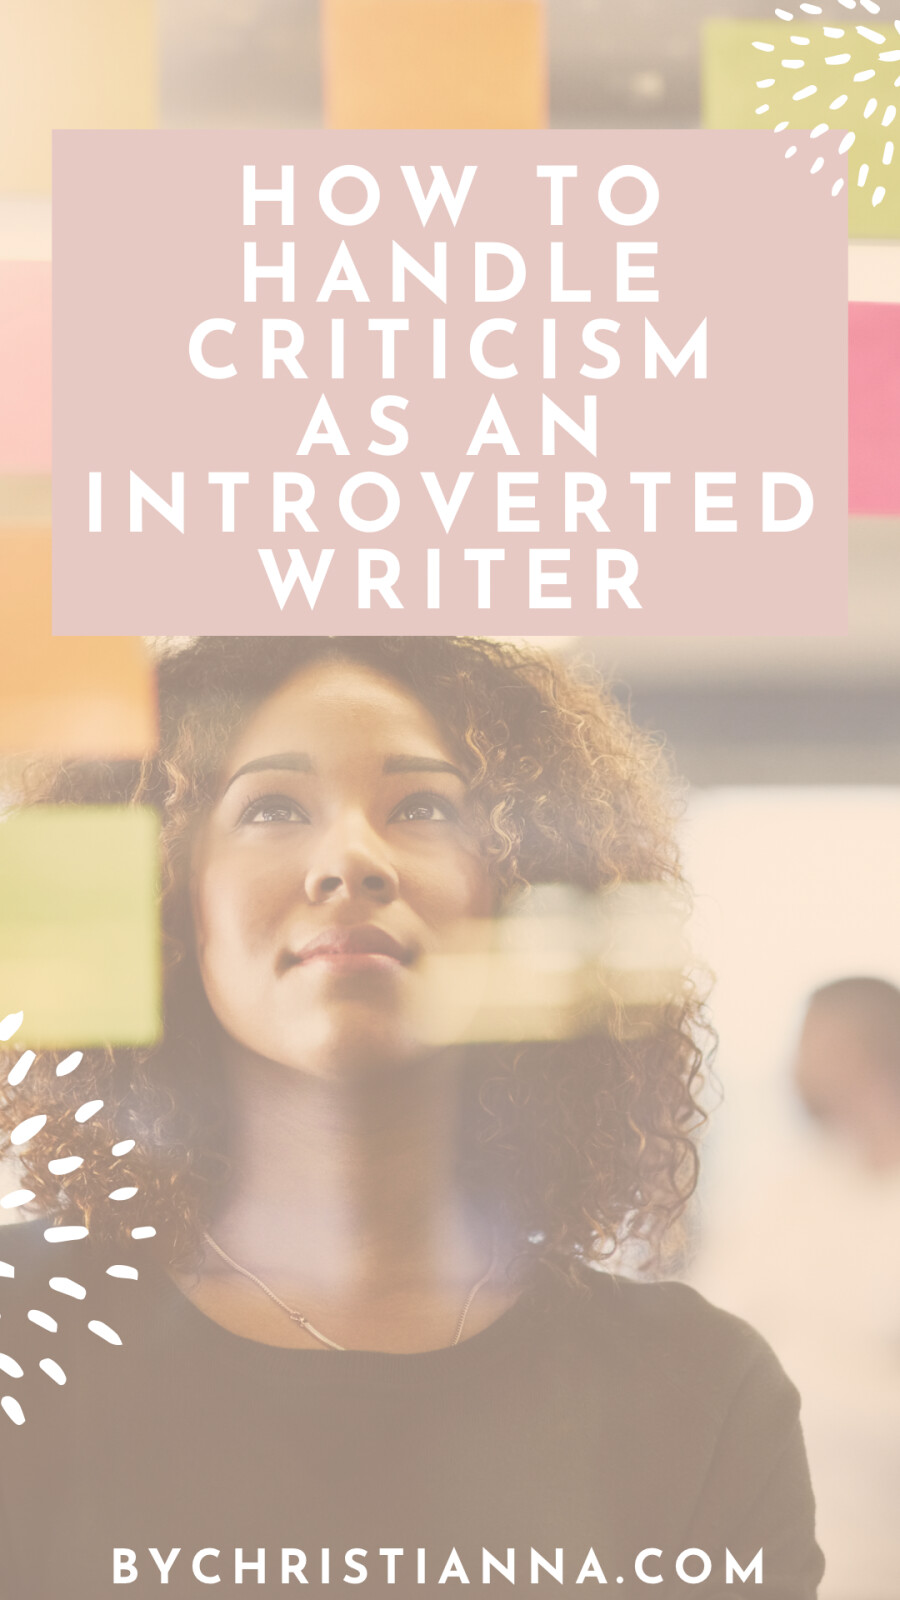 How to Handle Criticism as an Introverted Writer